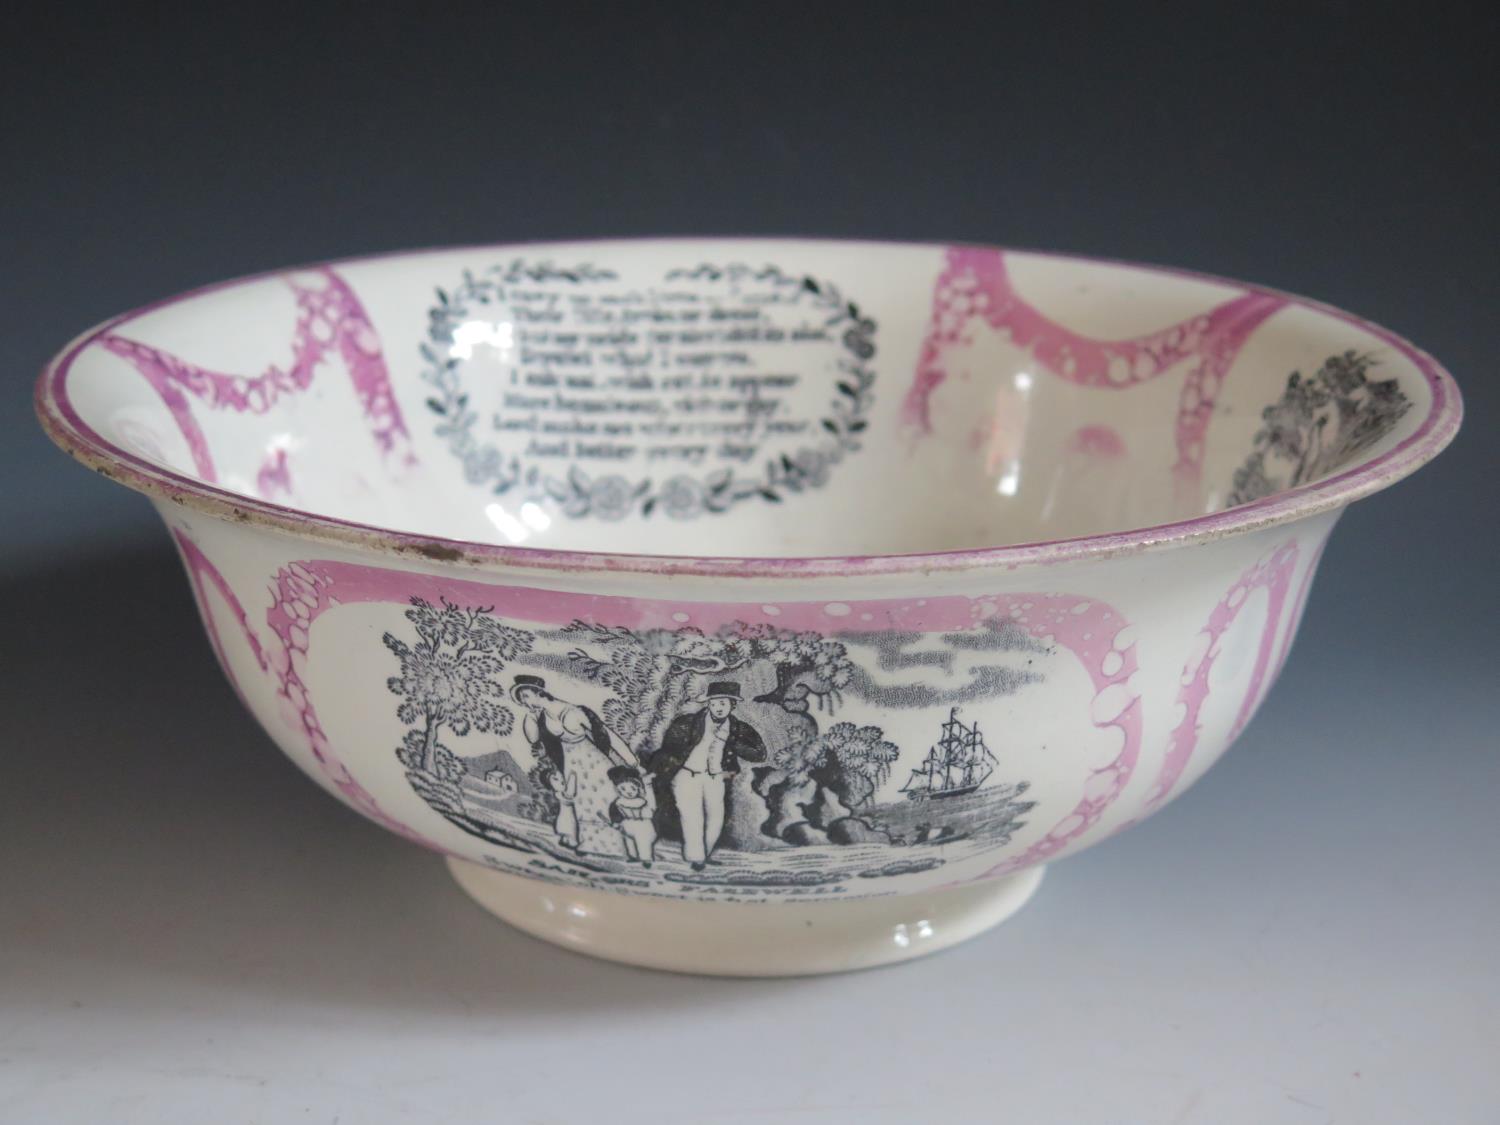 A G&A Albion Pottery Sunderland Lustre Bowl decorated in monochrome with Sailor's Farewell, poetic